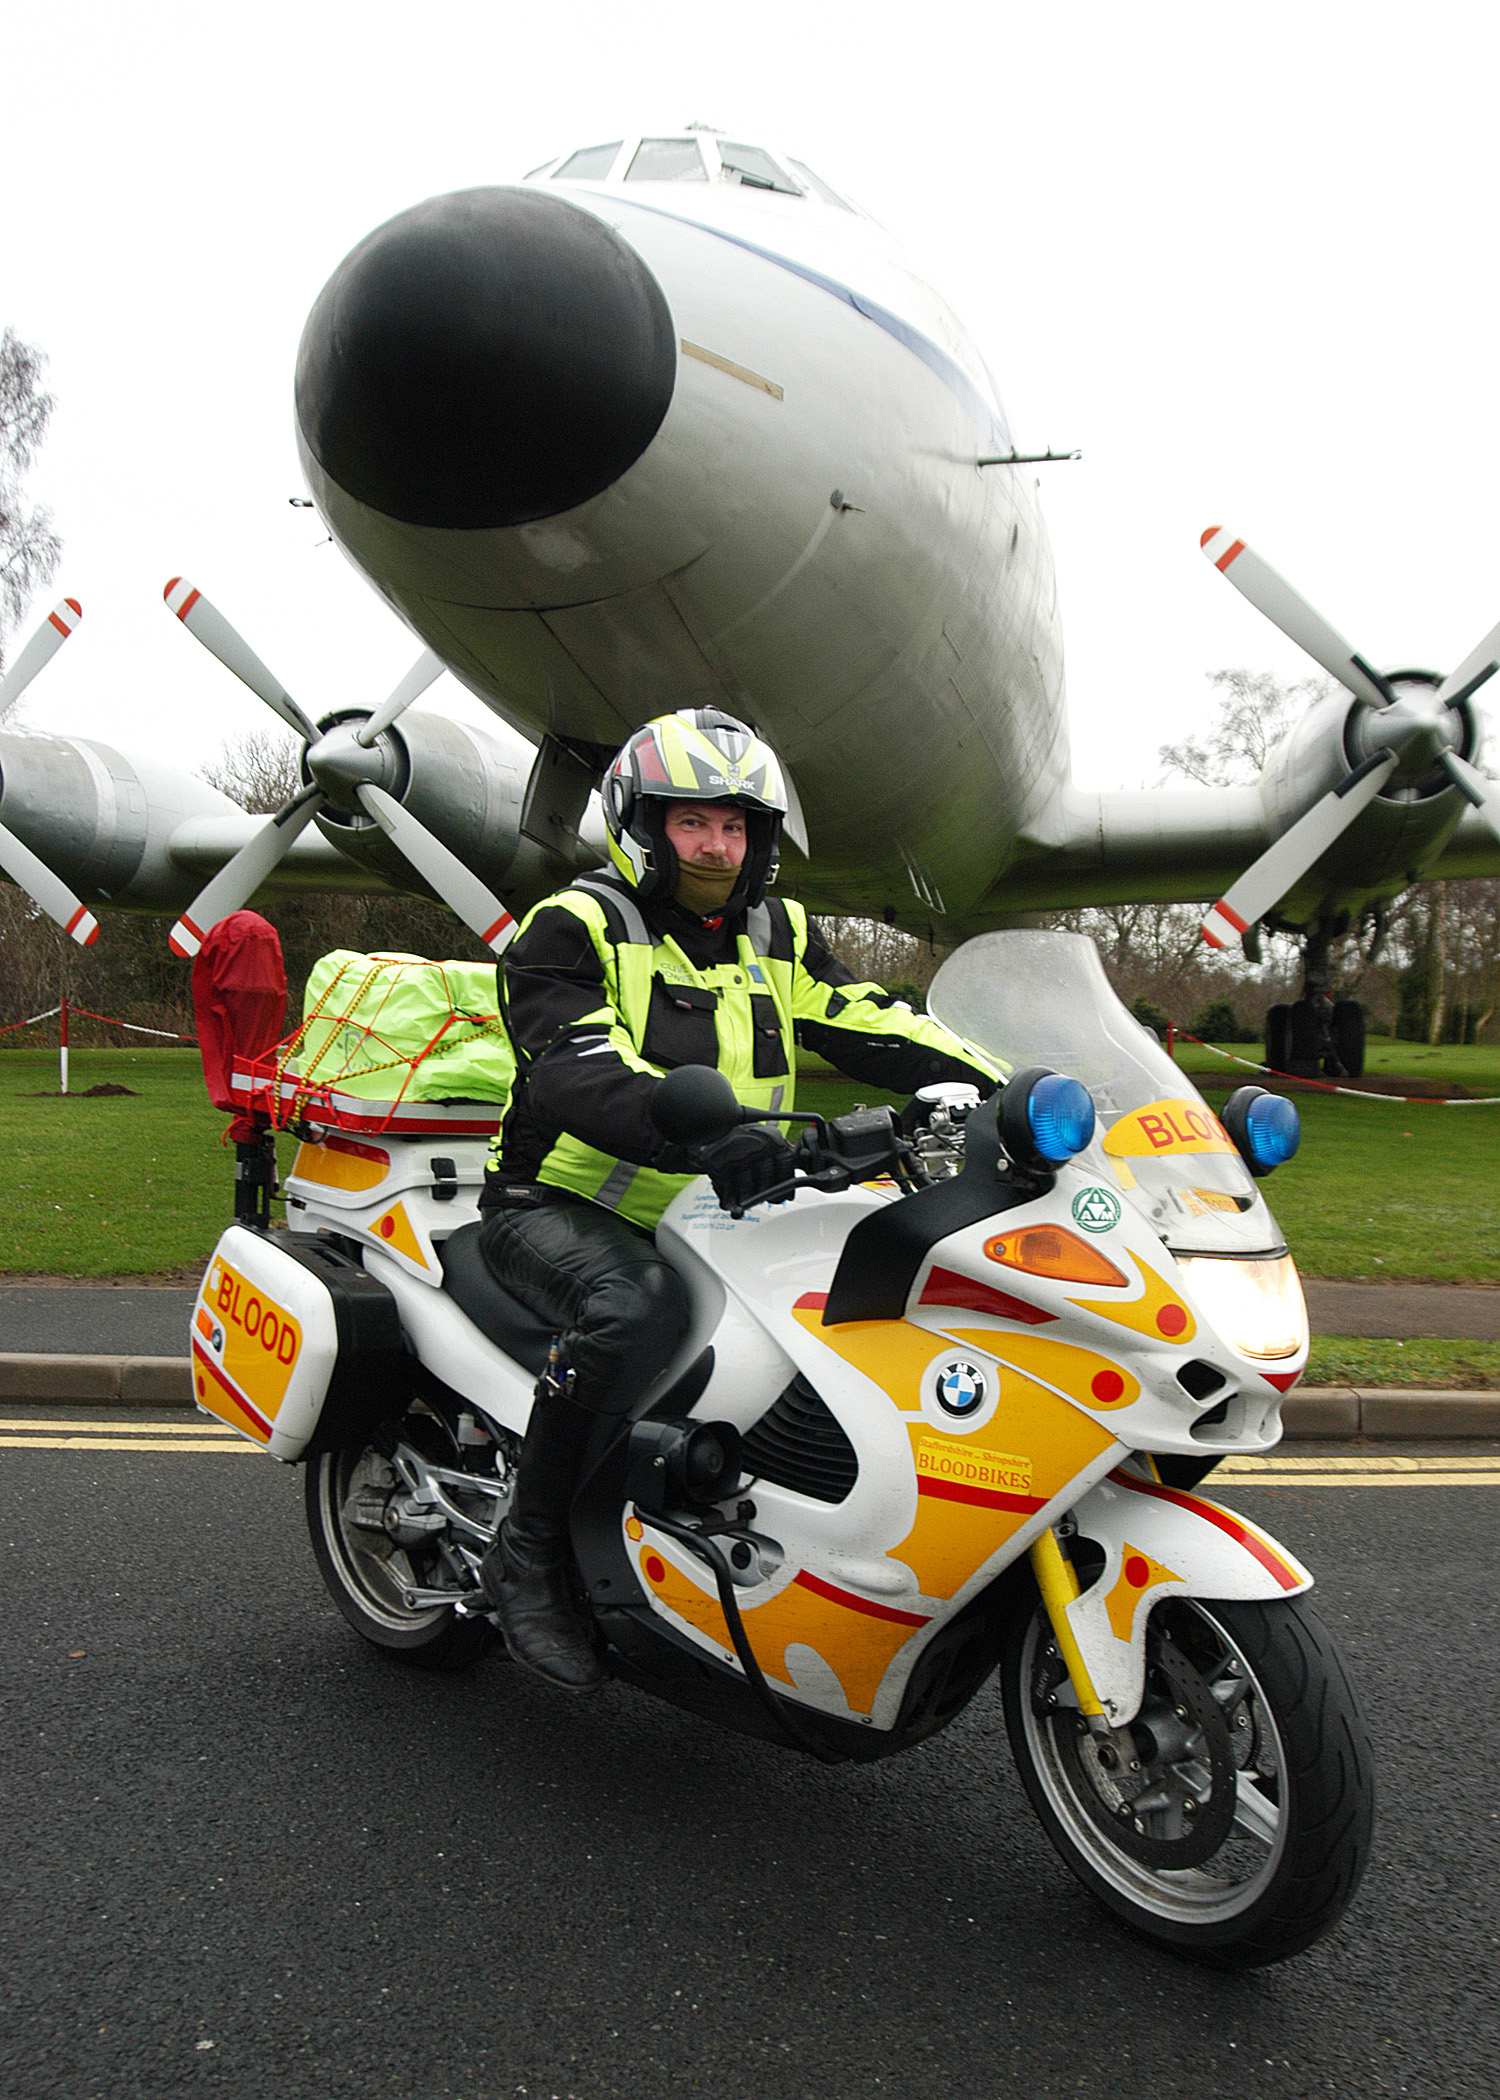 Clive Bower on a specially equipped Blood Bike at RAF Museum Cosford, the venue for the official launch of Shropshire and Staffordshire Blood Bikes on 22 January.